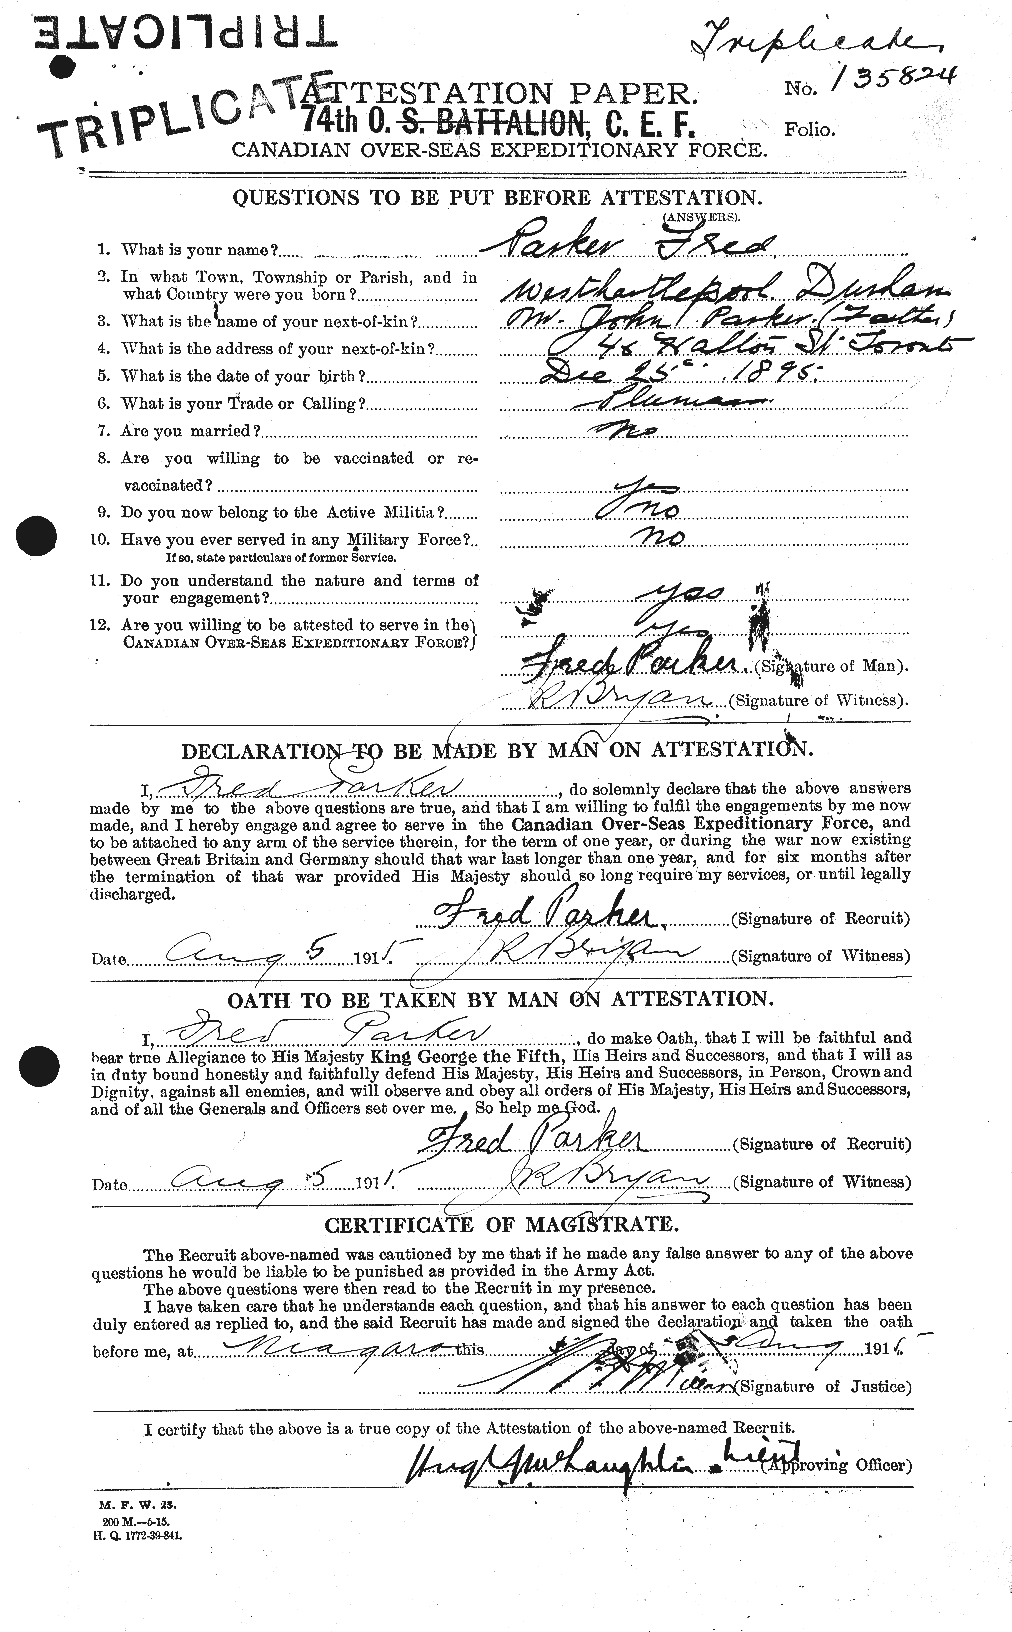 Personnel Records of the First World War - CEF 565203a